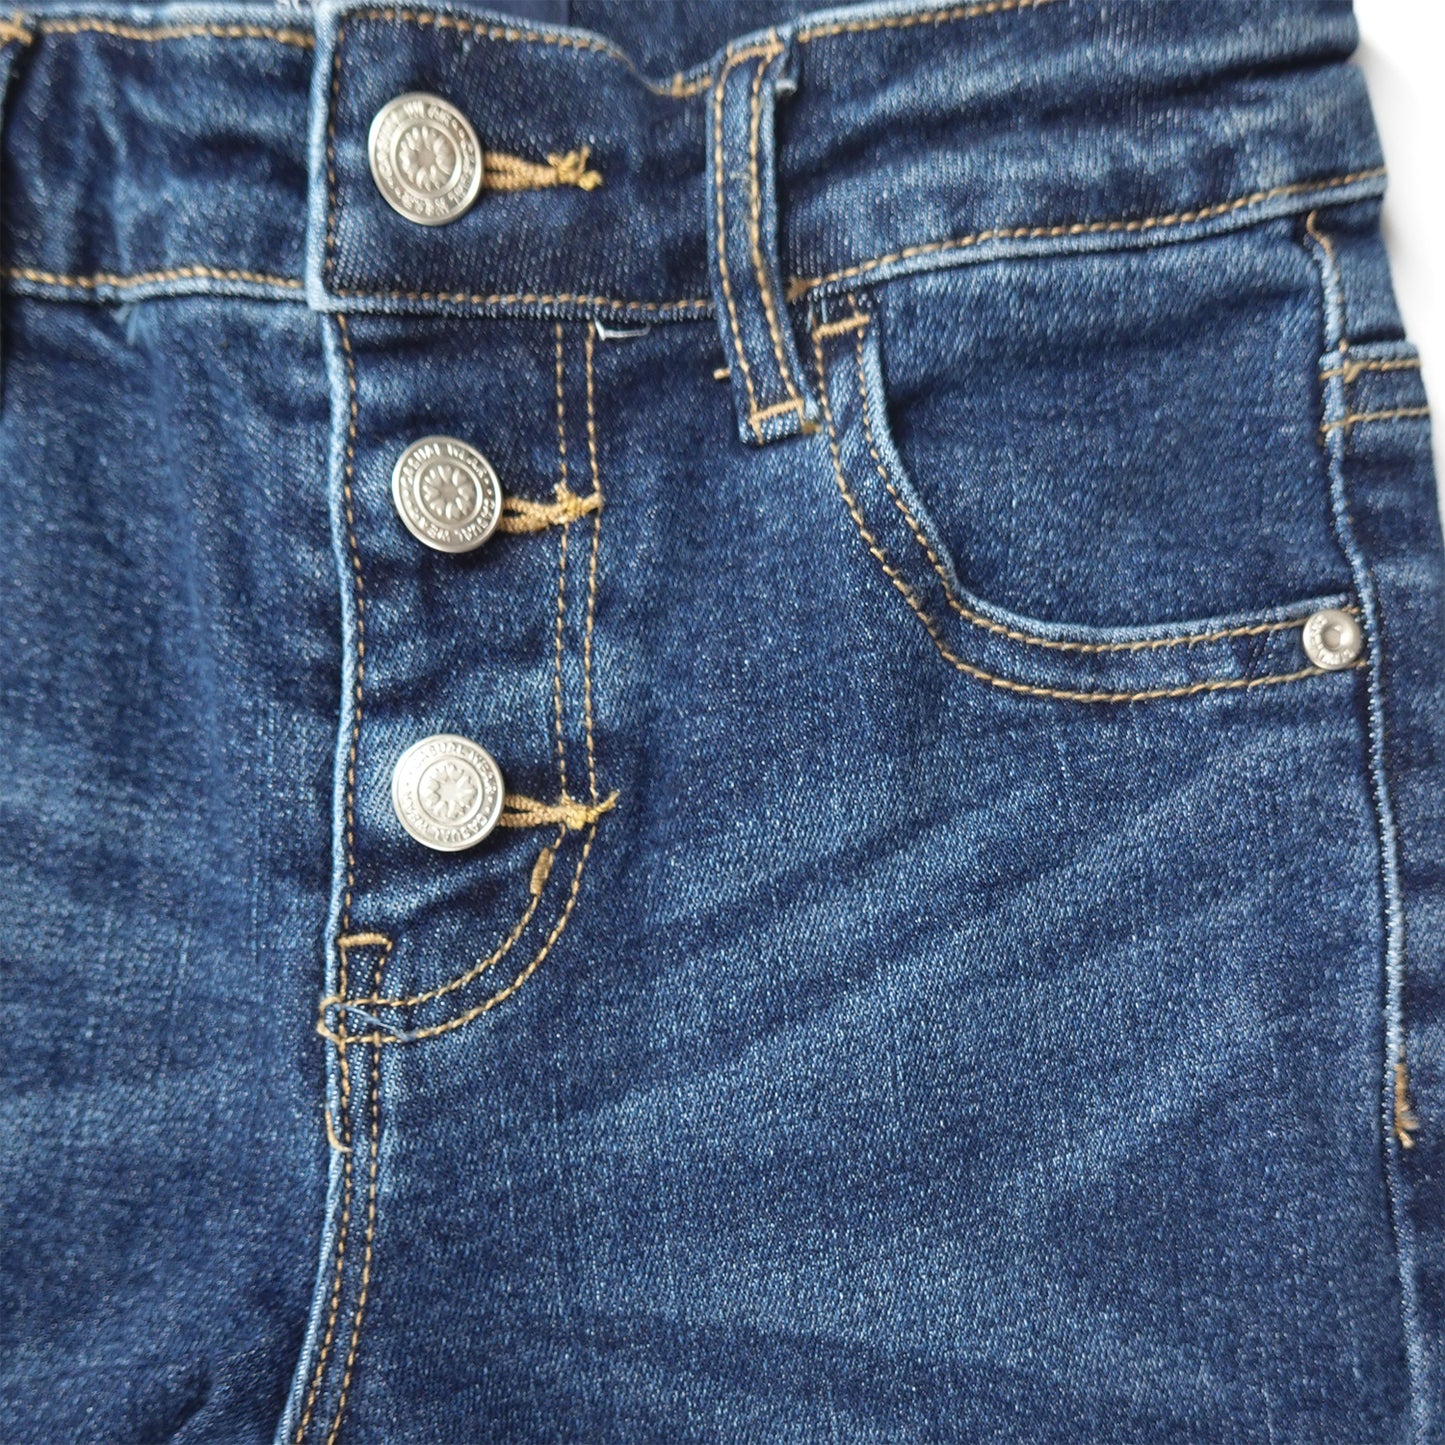 Girls Jeans Raw Edge 3 Buttons Stretchy Bell-bottom Denim Pants